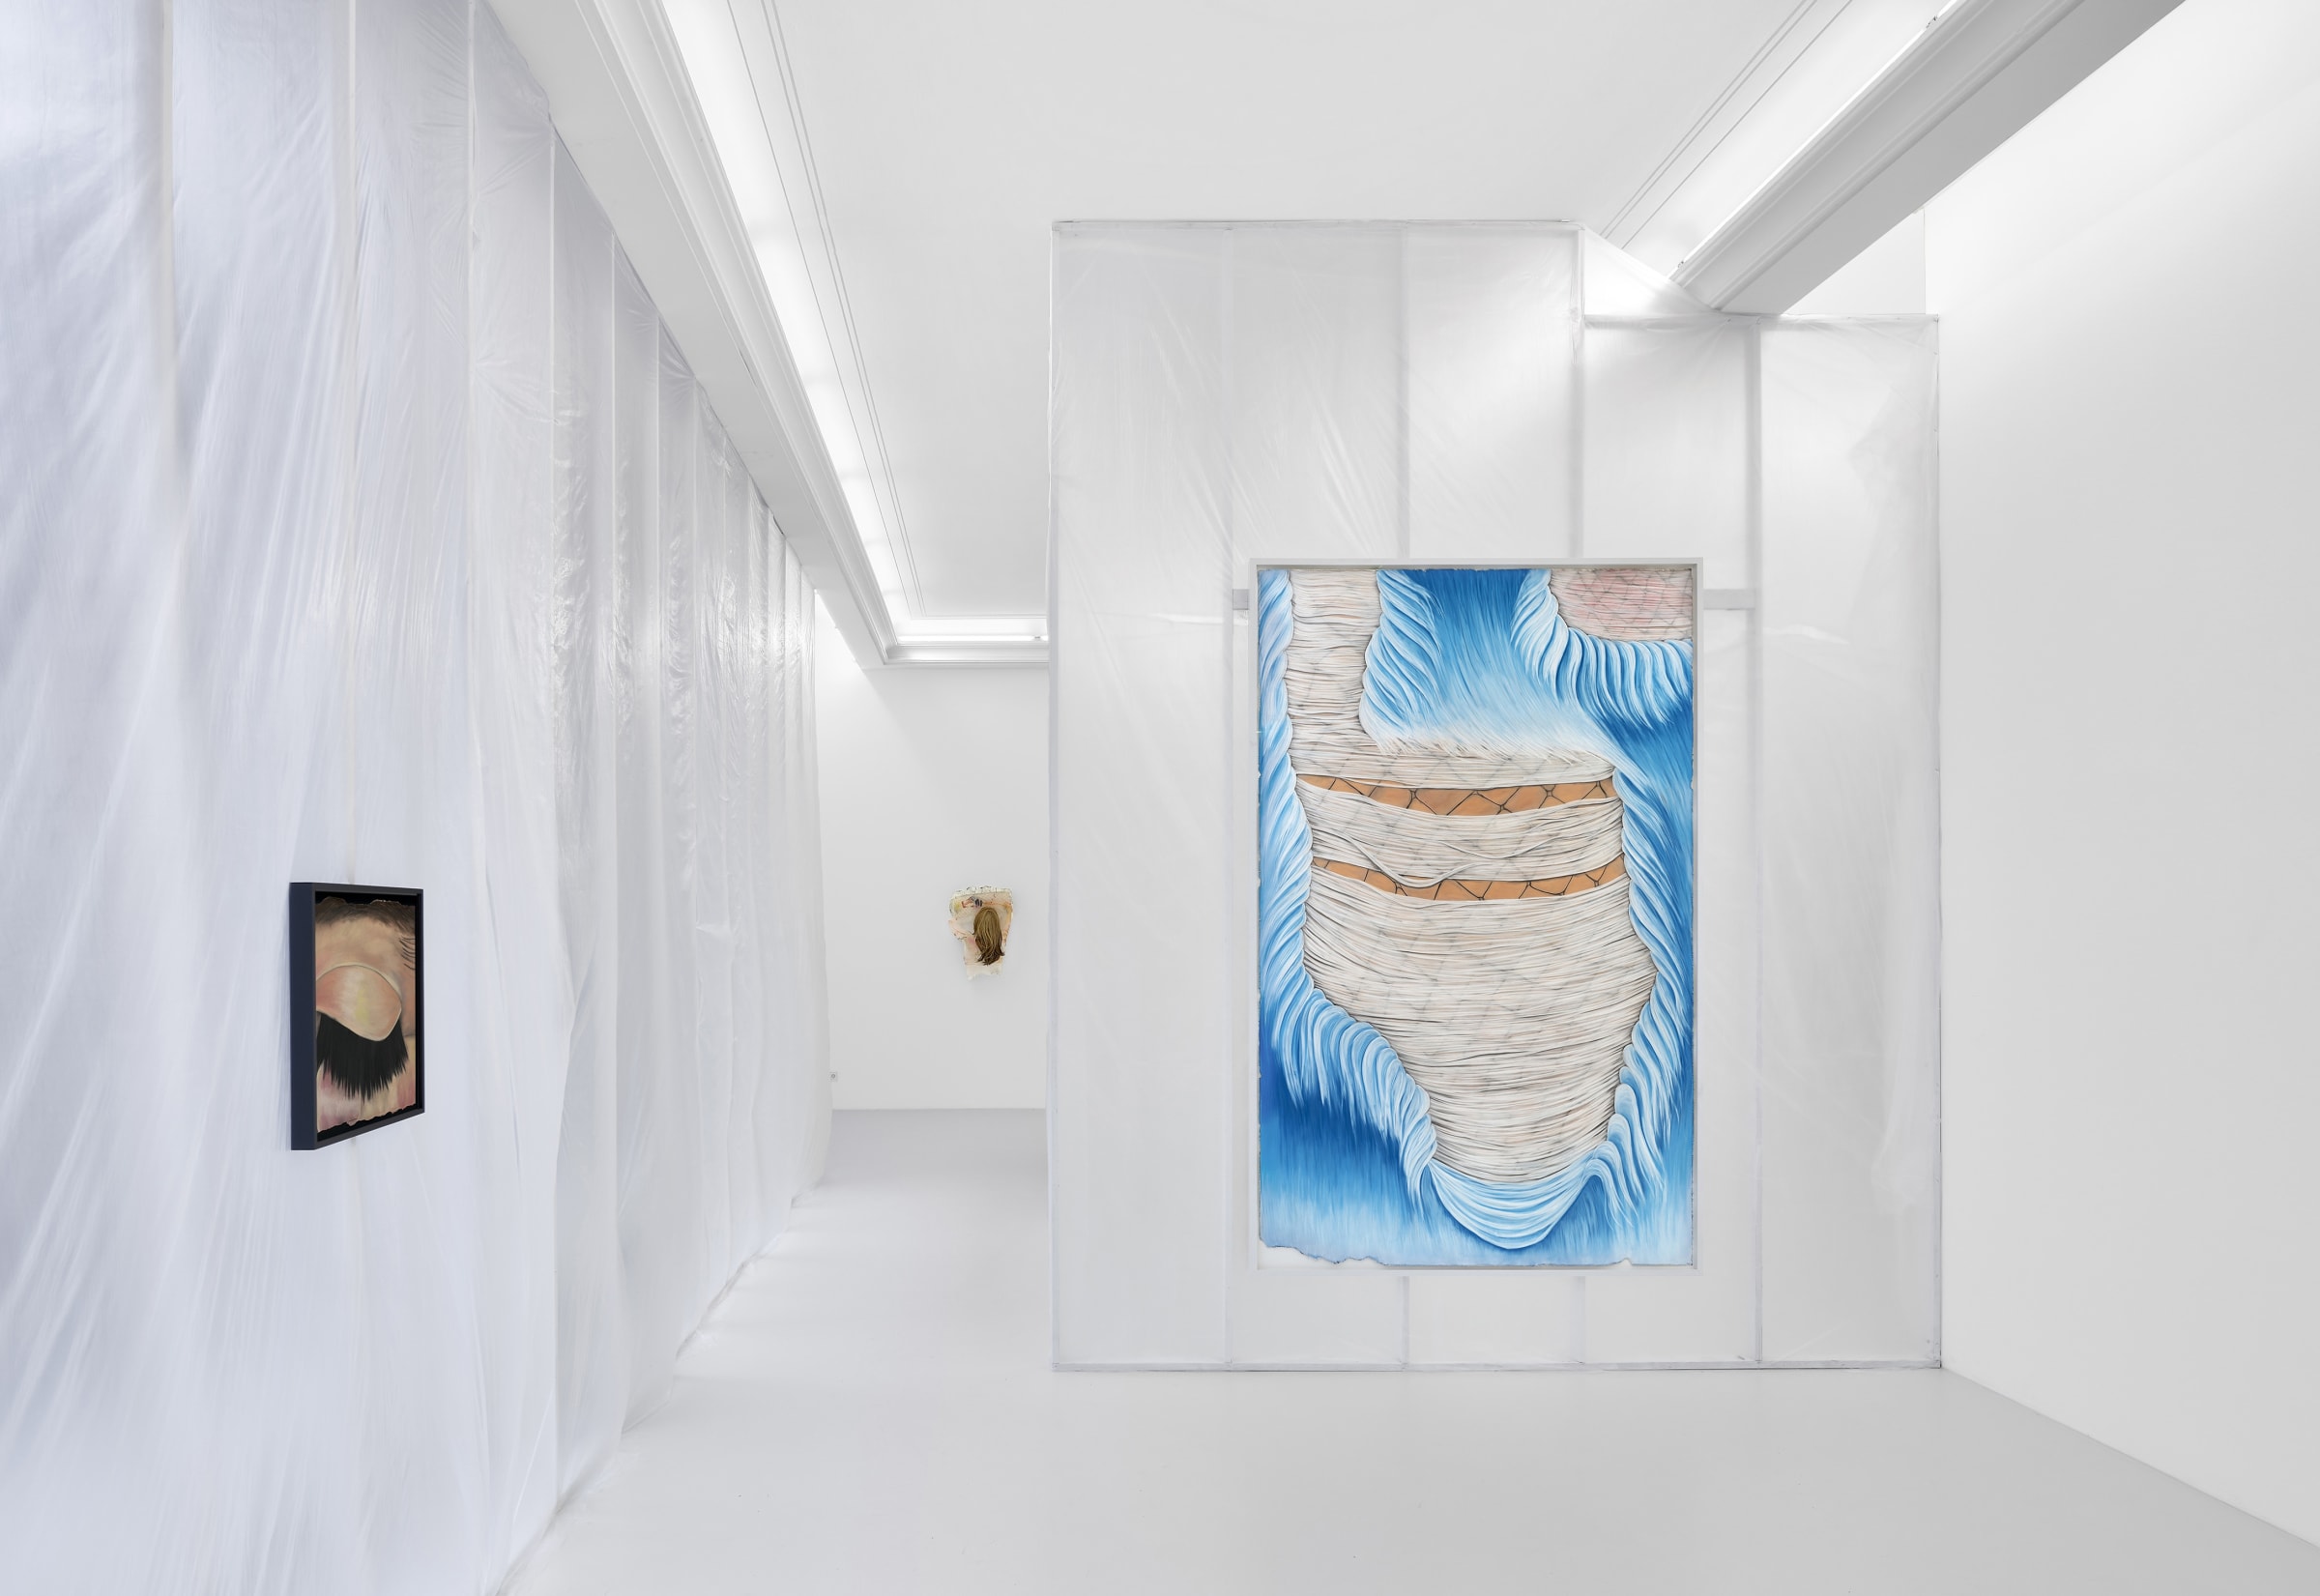 Rebecca Ackroyd 100mph Installation View January 22 – February 26, 2021 Peres Projects, Berlin Photographed by: Matthias Kolb